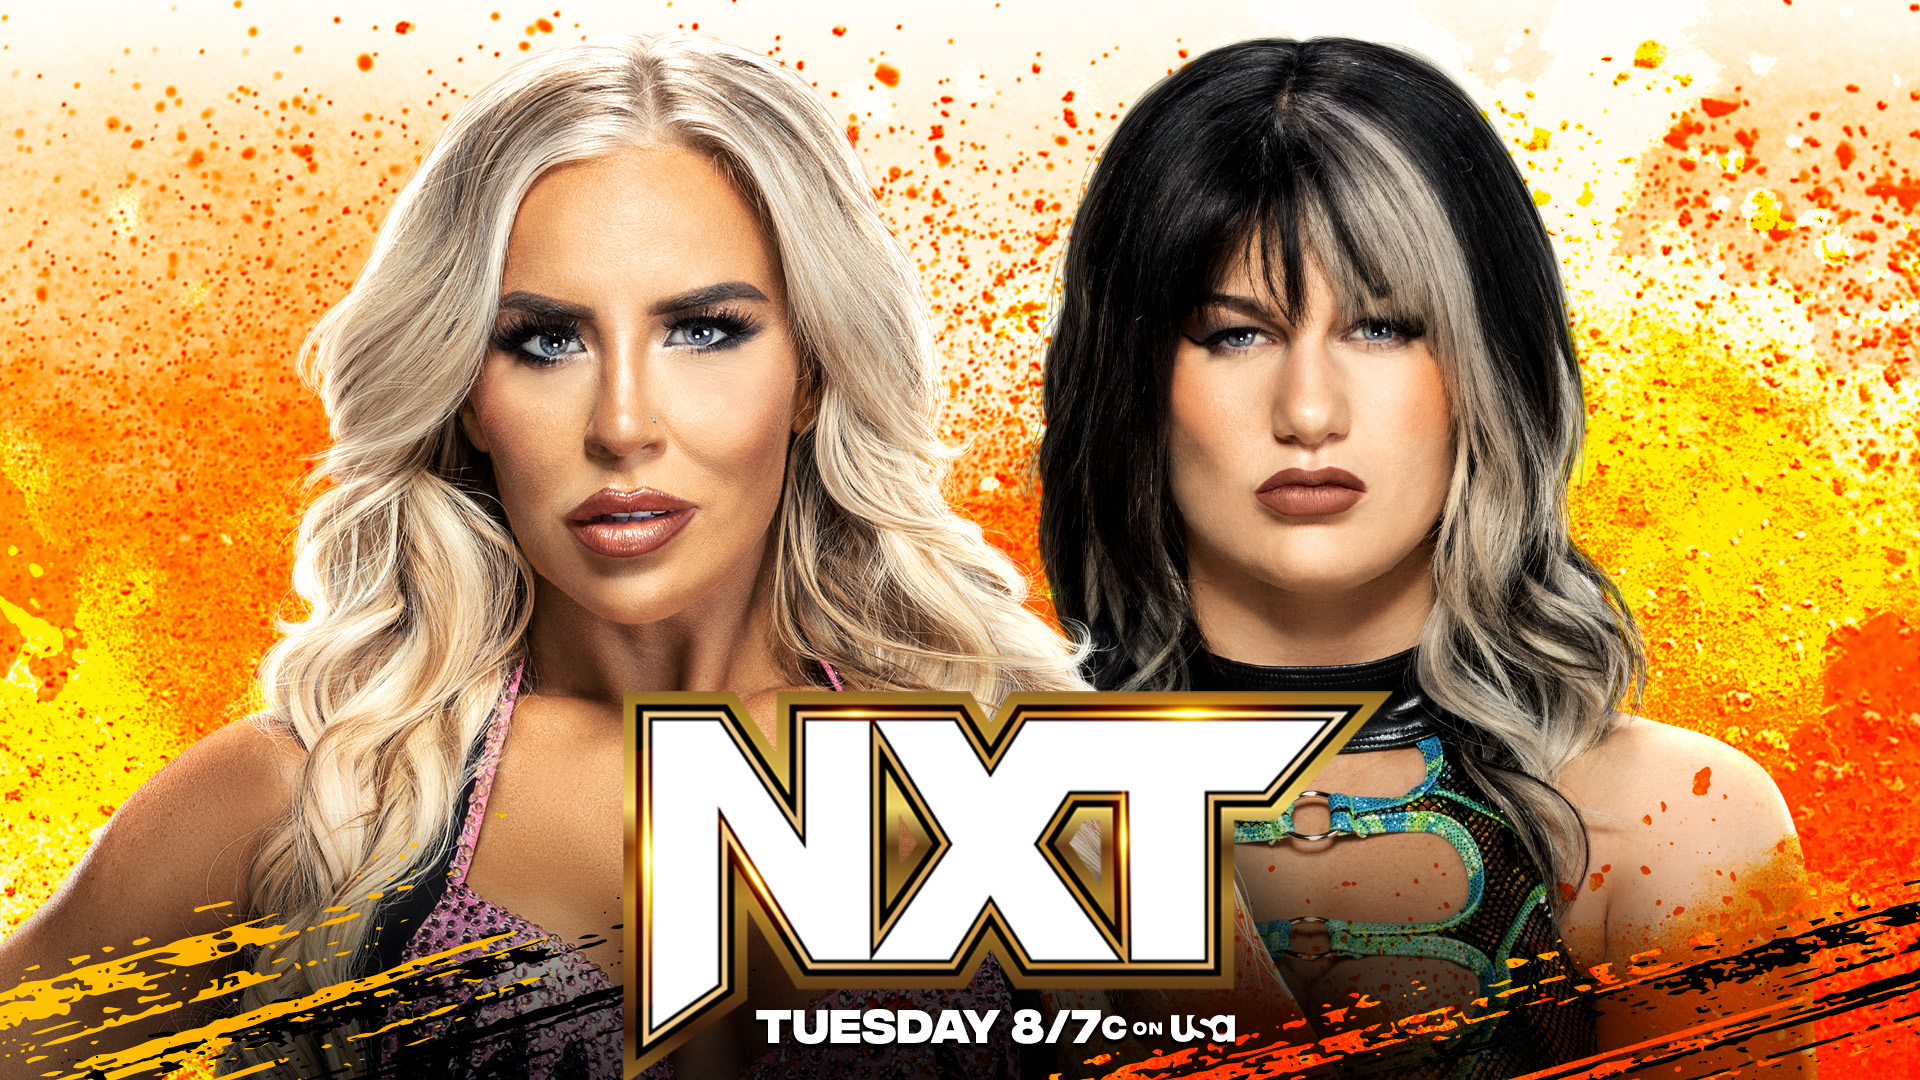 A match graphic for WWE NXT featuring Dana Brooke and Blair Davenport.